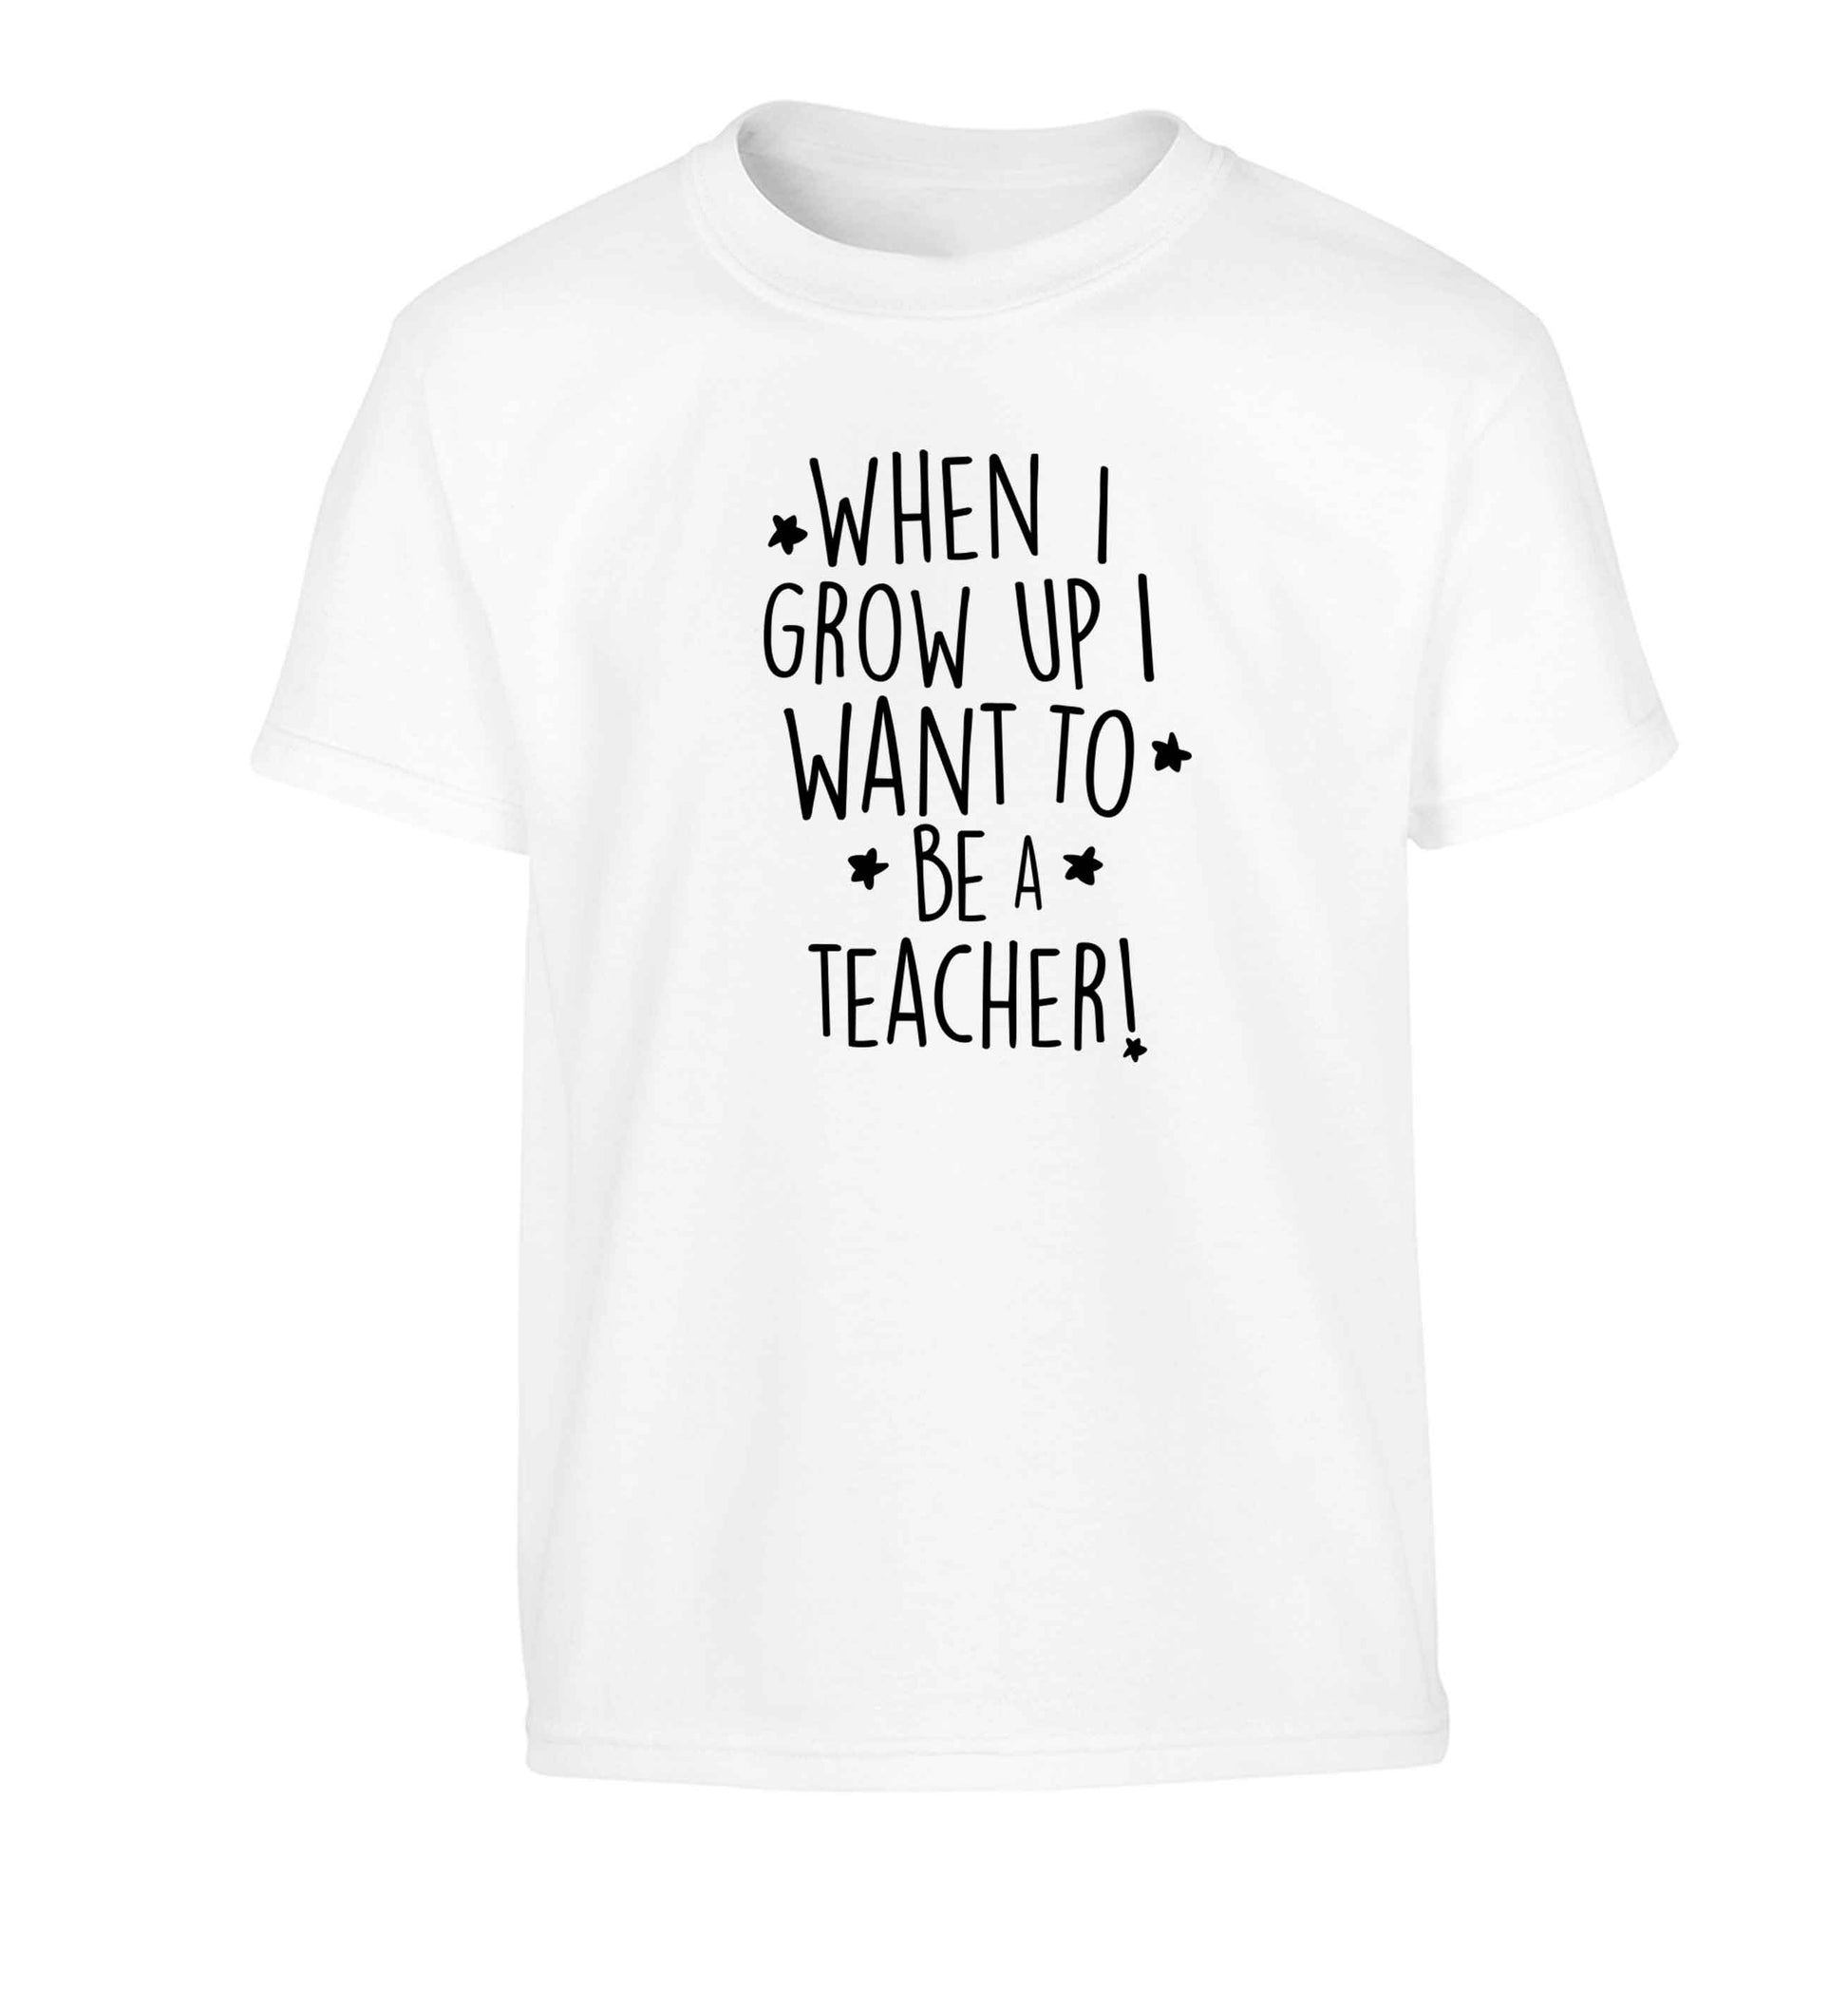 When I grow up I want to be a teacher Children's white Tshirt 12-13 Years